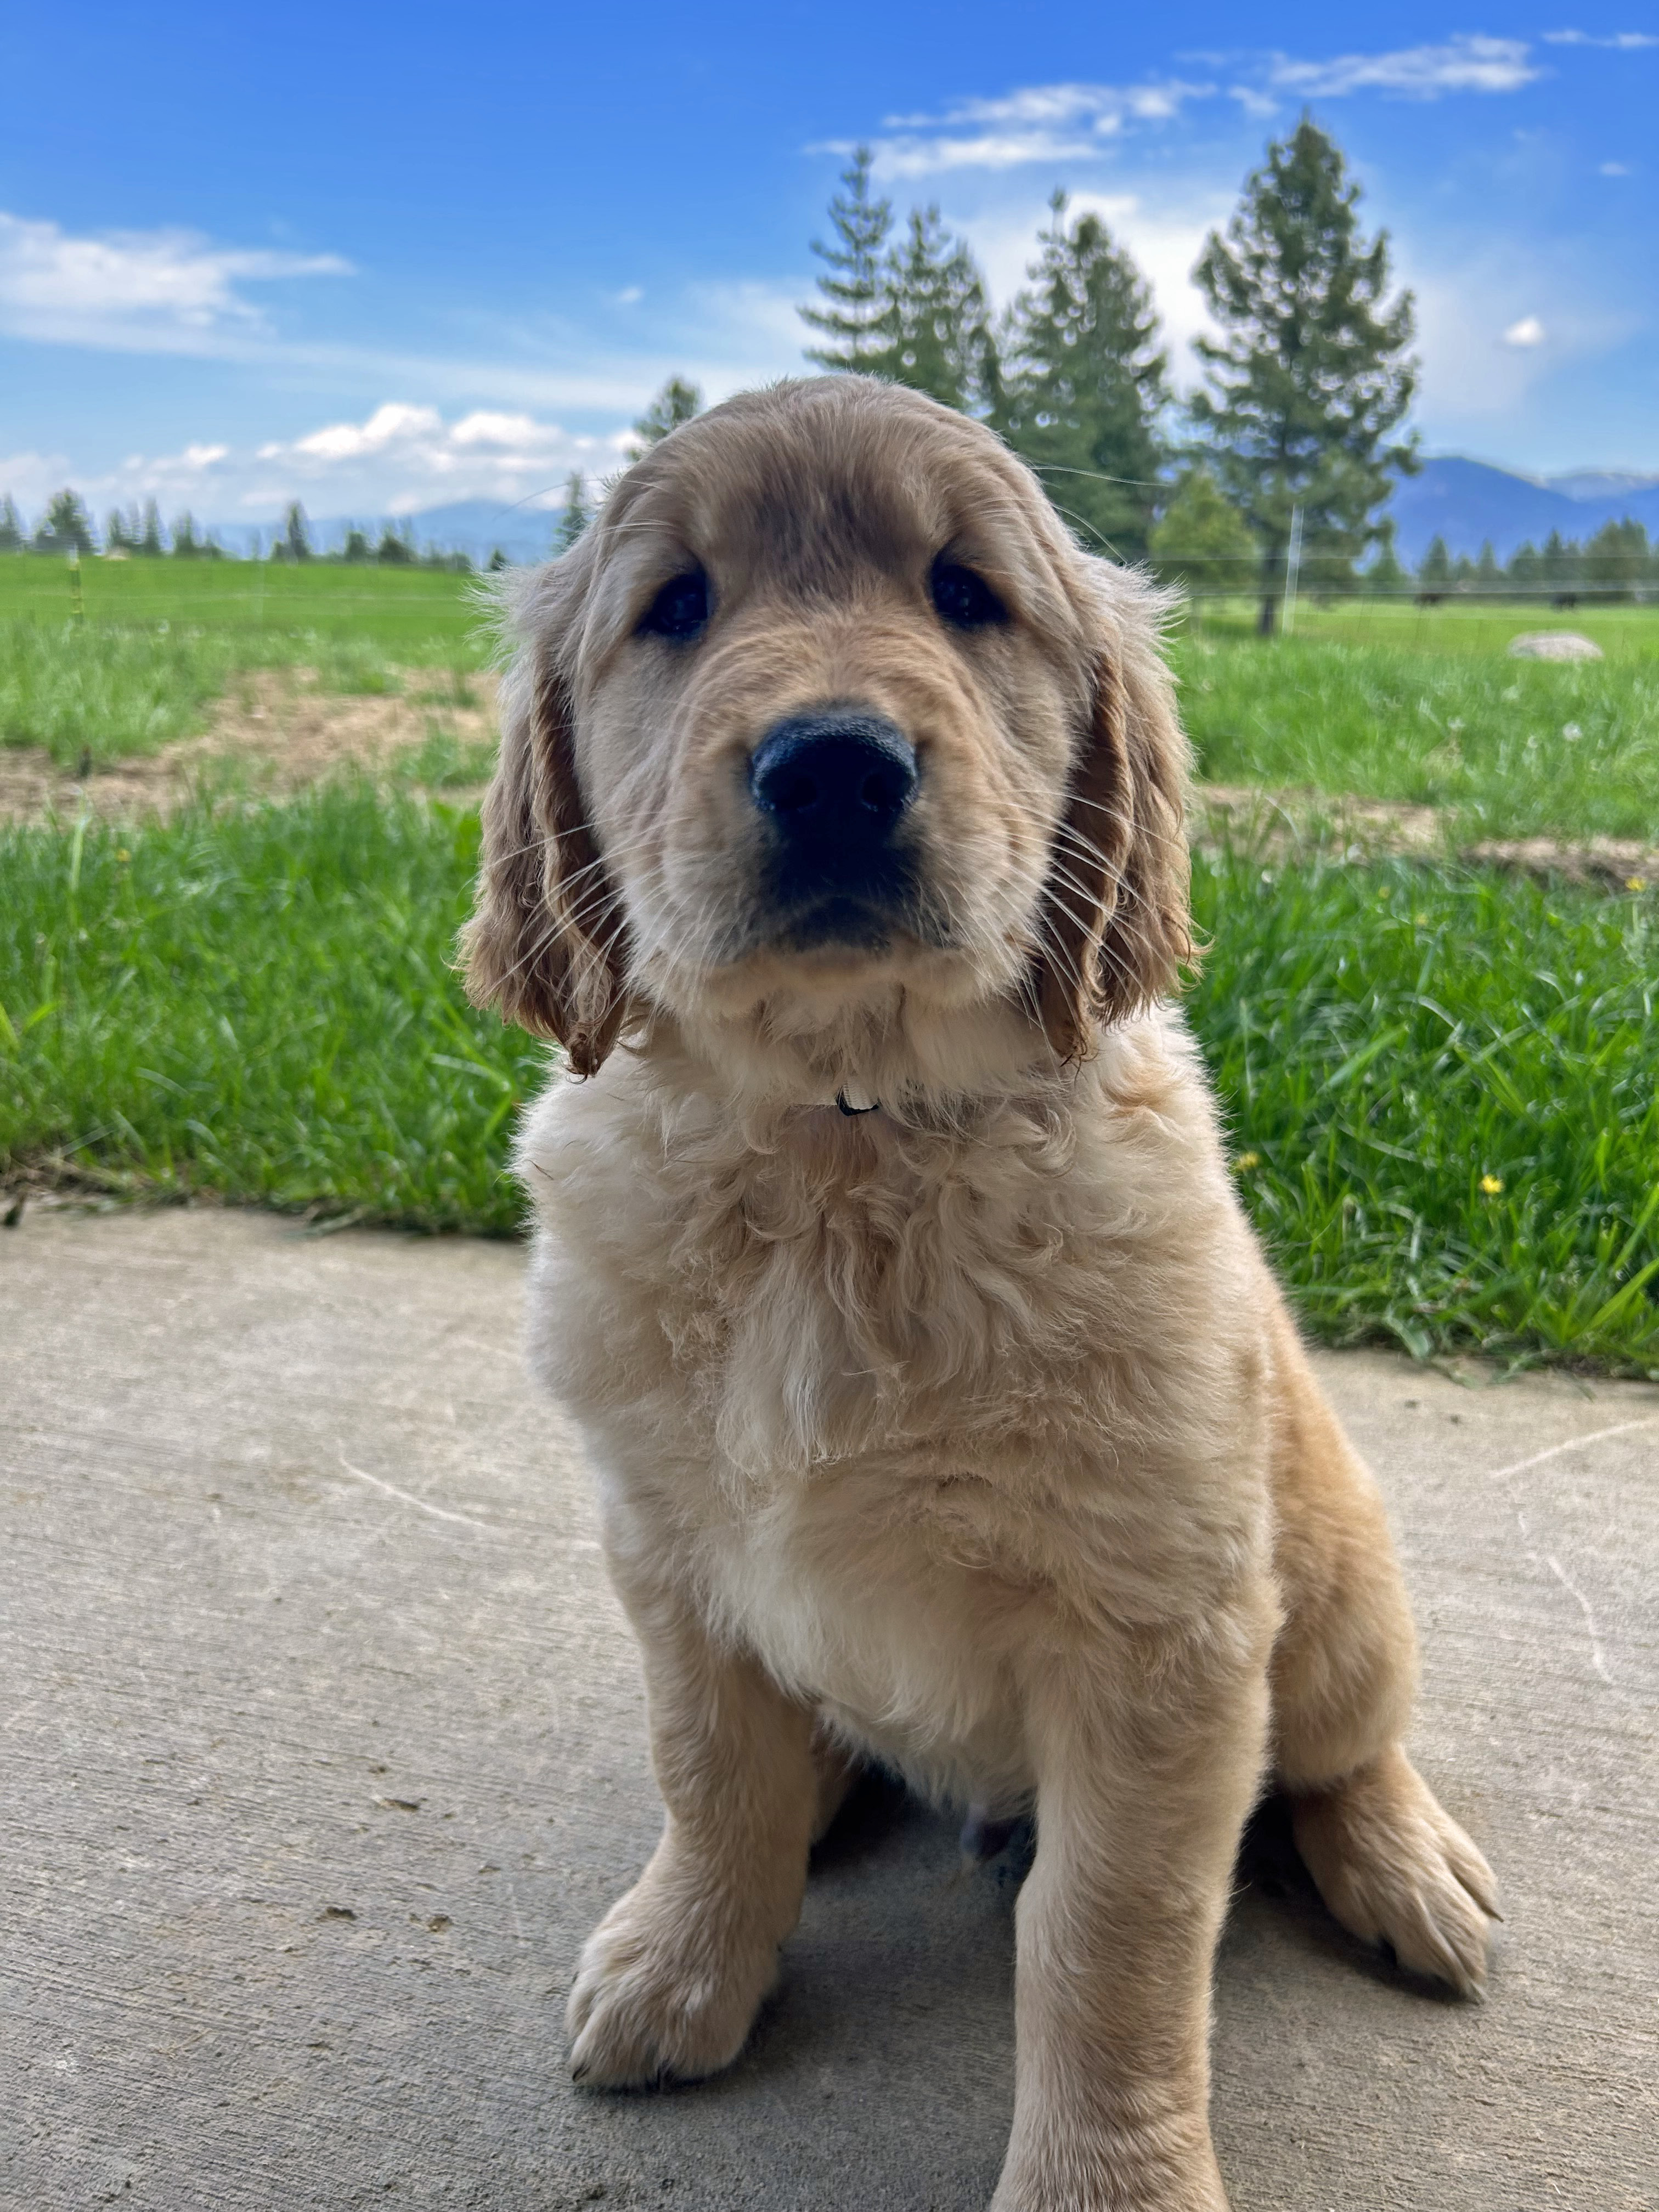 AKC GOLDENS 5 Males Available.  AKC GOLDENS 5 Males Available. Ready 6/3. Parents OFA & health certified. Pups come with 2 yr health guarantee, age appropriate shots, microchip & more. Raised & socialized in our home. Visit BlueMoonAcresGoldenRetrievers.com for photos & videos! $1,600. (208) 408-0826 BMAGoldens@gmail.com